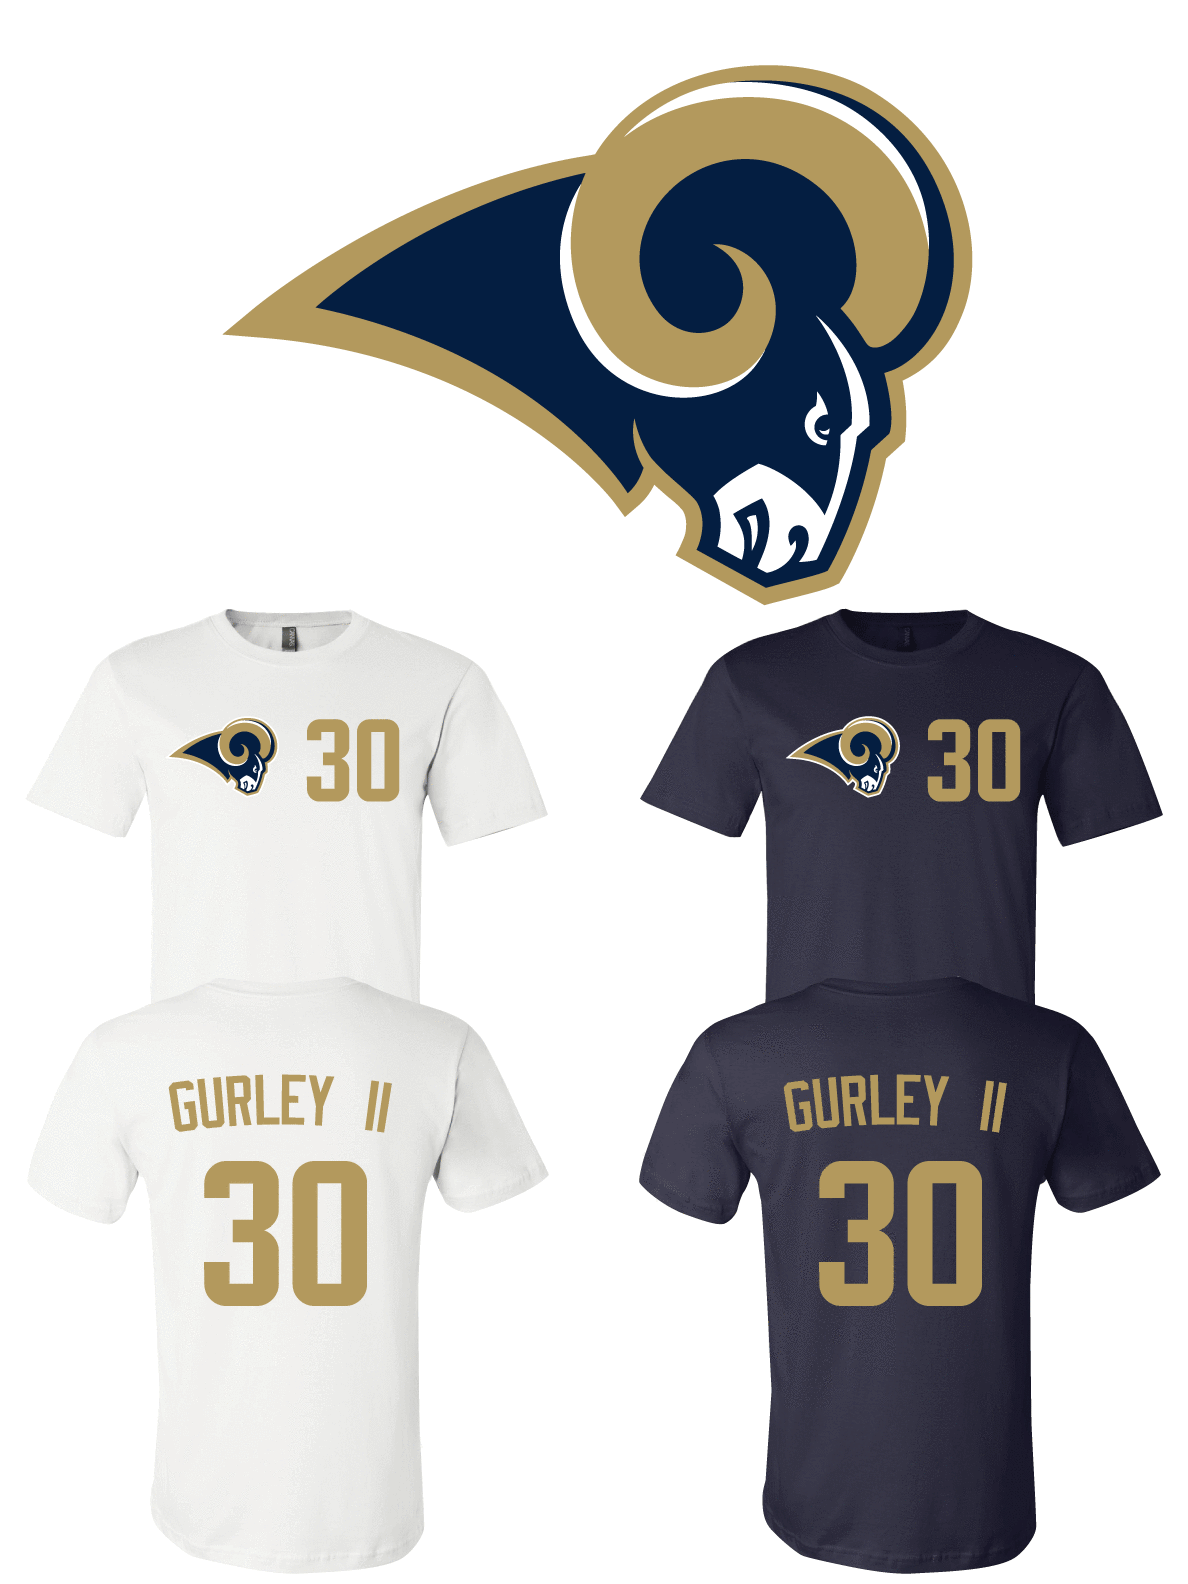 Todd Gurley #30 Los Angeles Rams Jersey player shirt